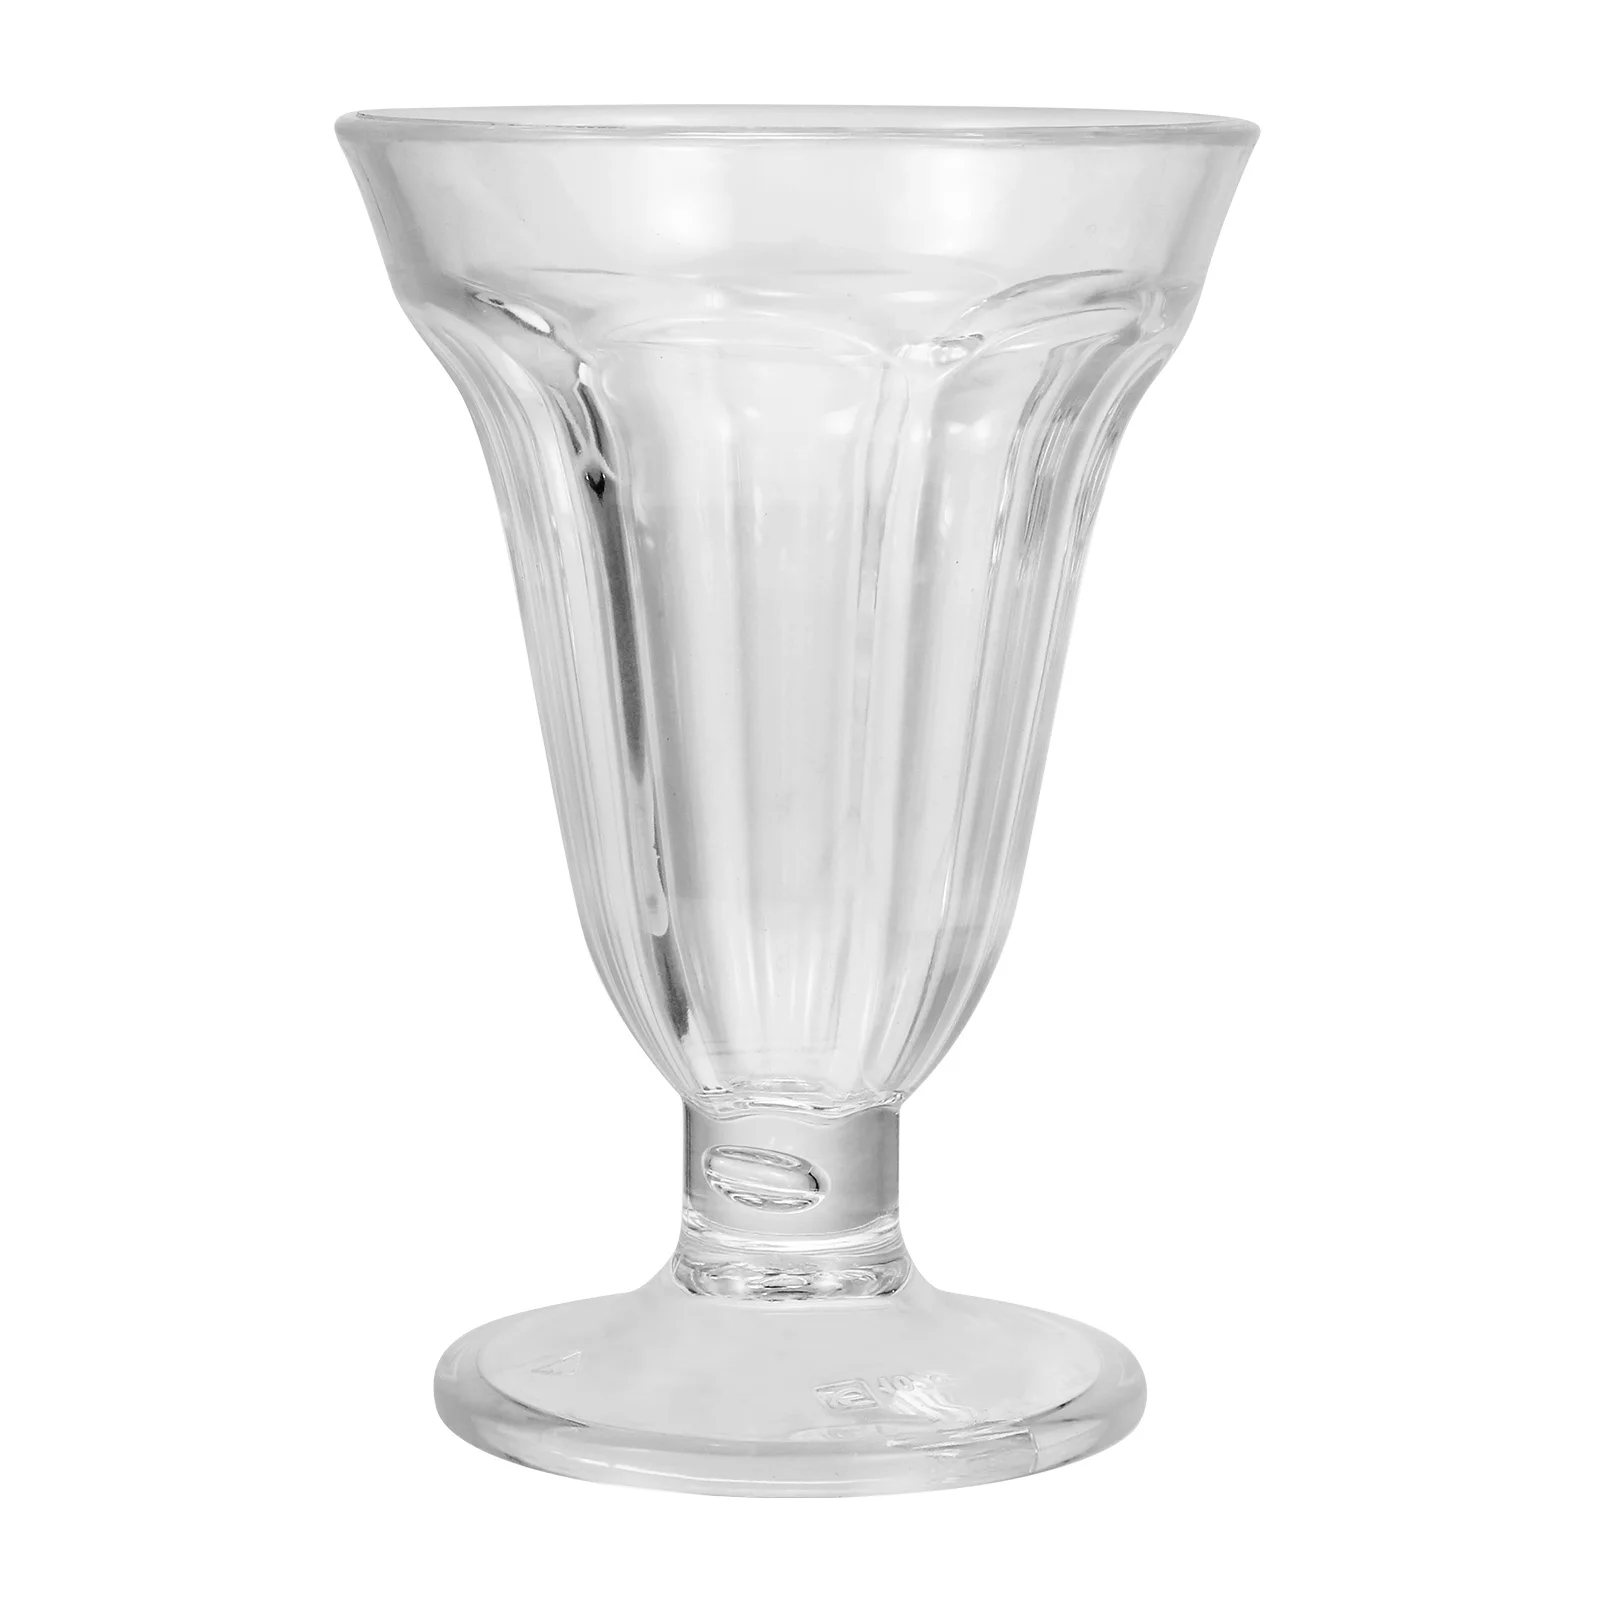 

Dessert Cup Footed Bowl Ice Cream Serving Bowls Appetizer Trifle Cups Crystal Pudding Dishes Glasses Tumbler